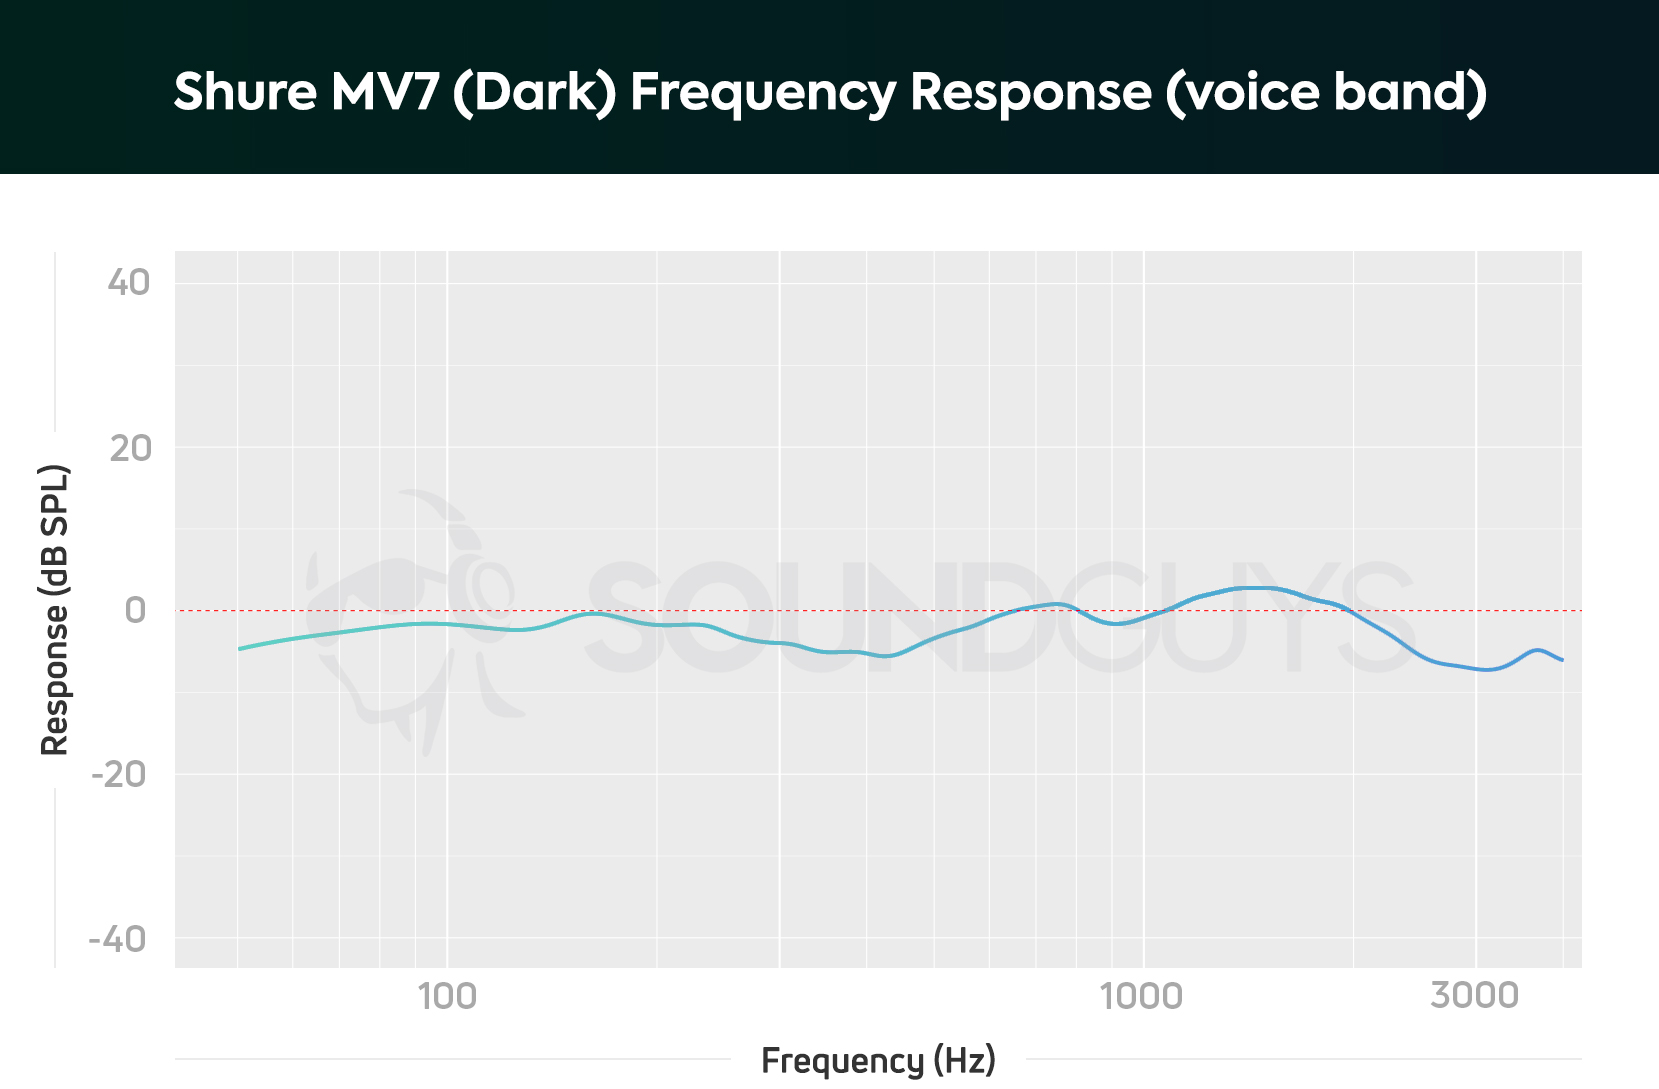 The Shure MV7 voice band frequency response with the "Dark" setting enabled; all audio frequencies are relayed with nearly the same loudness, save for a de-emphasized range from 170-600Hz.